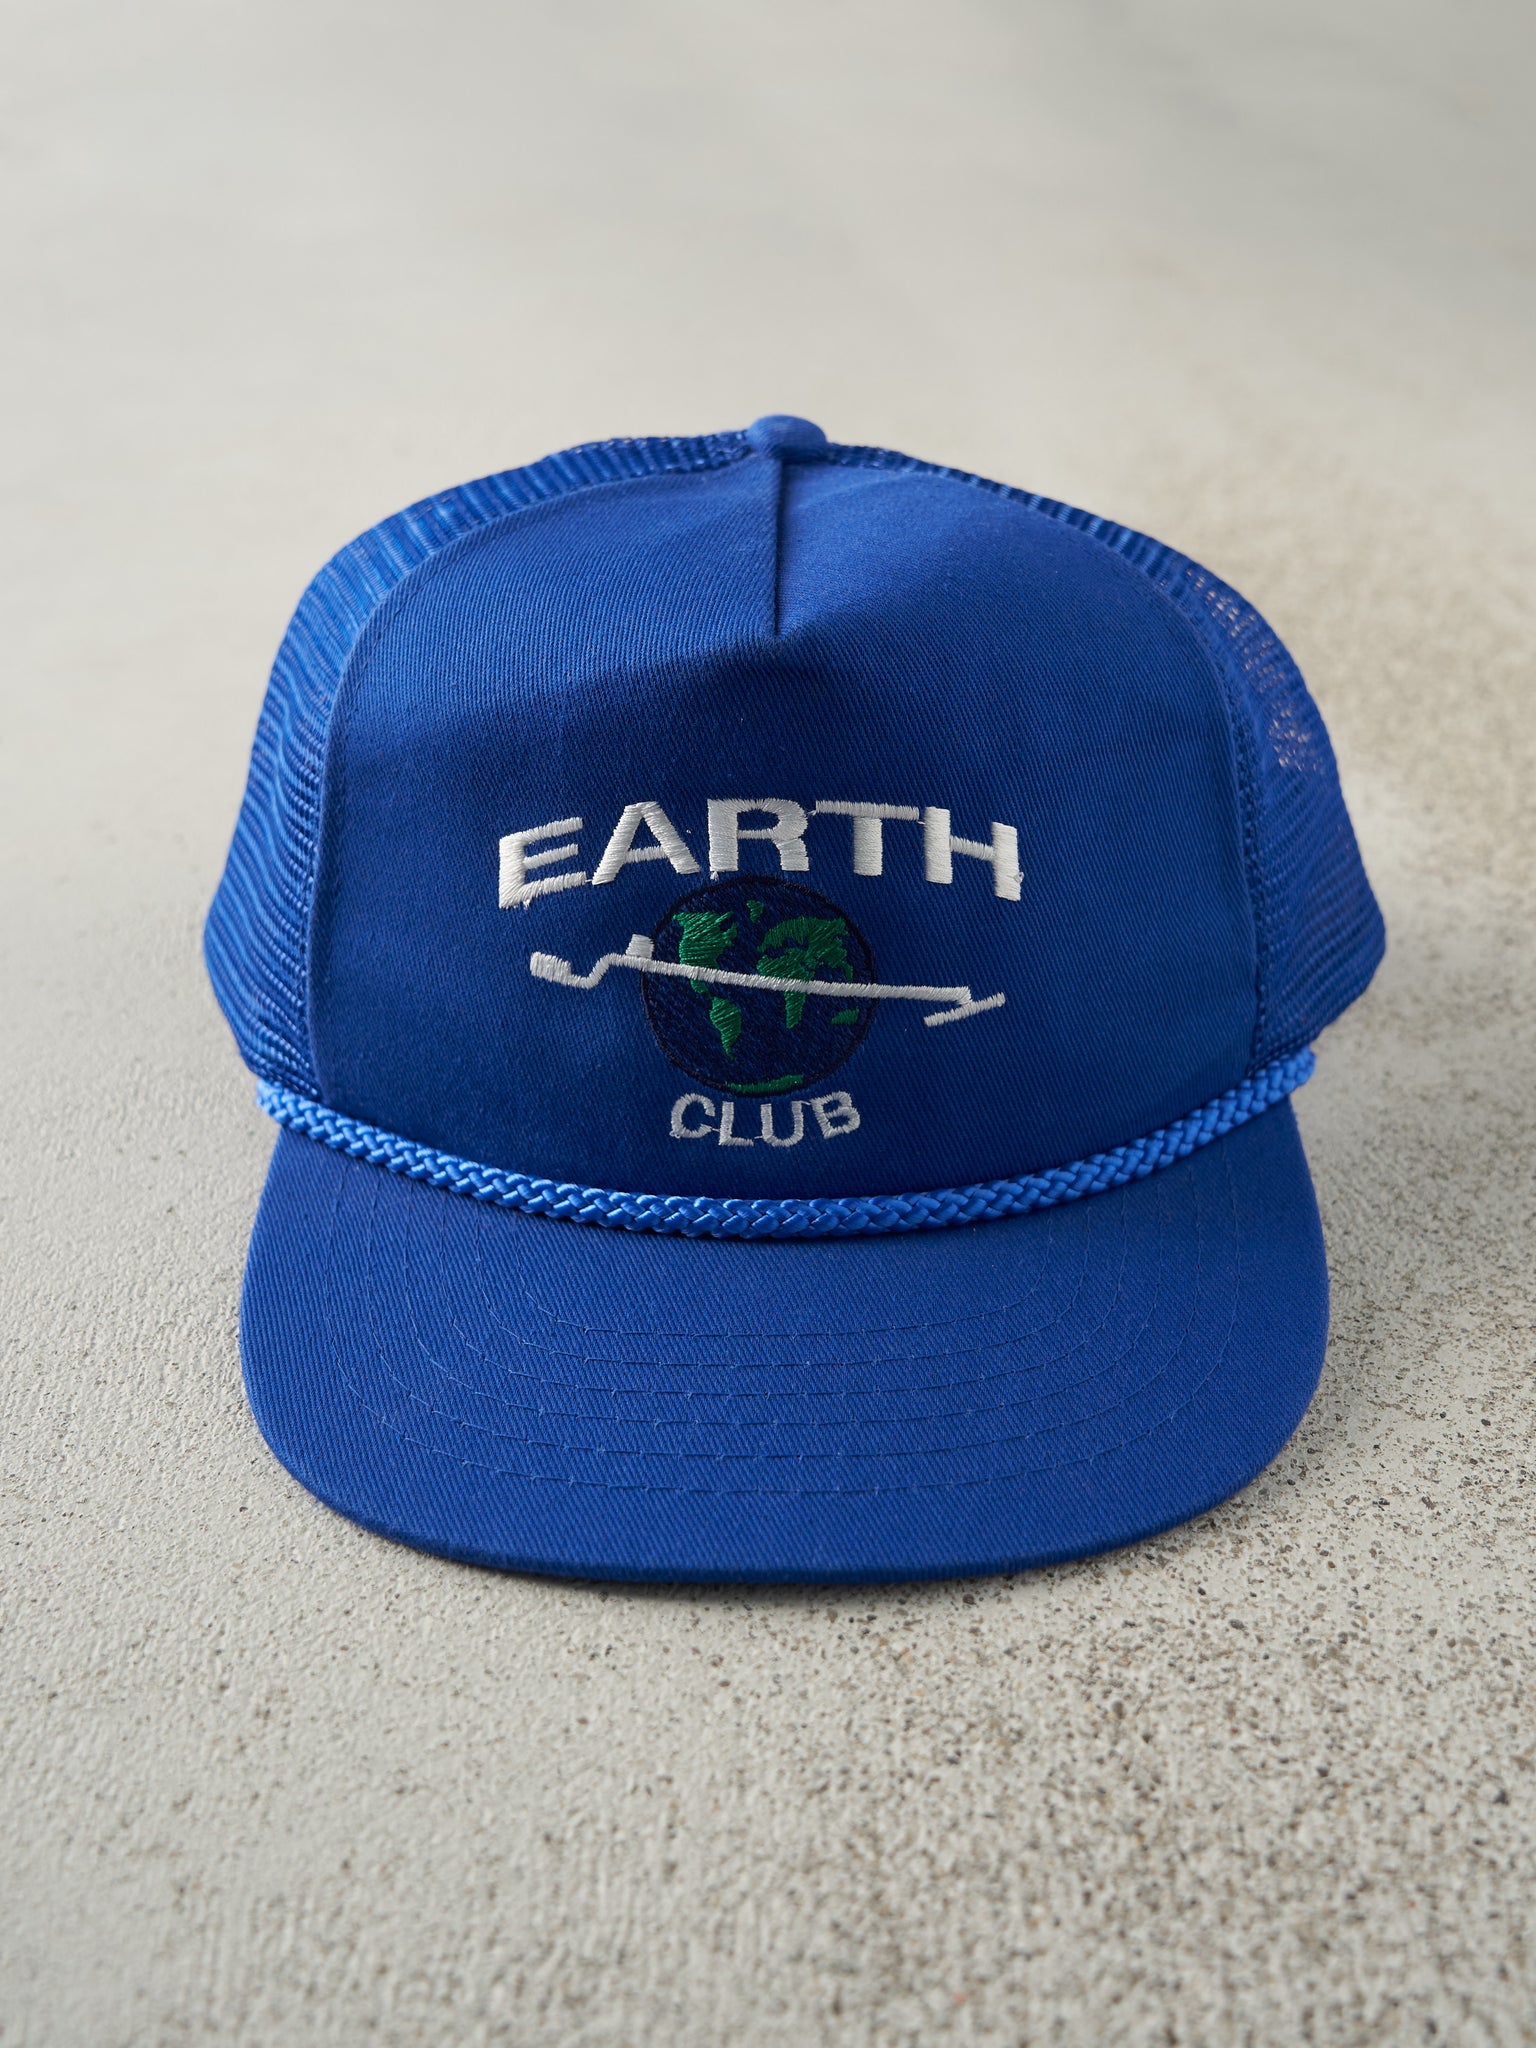 Vintage 80s Blue Embroidered Earth Club Trucker Hat